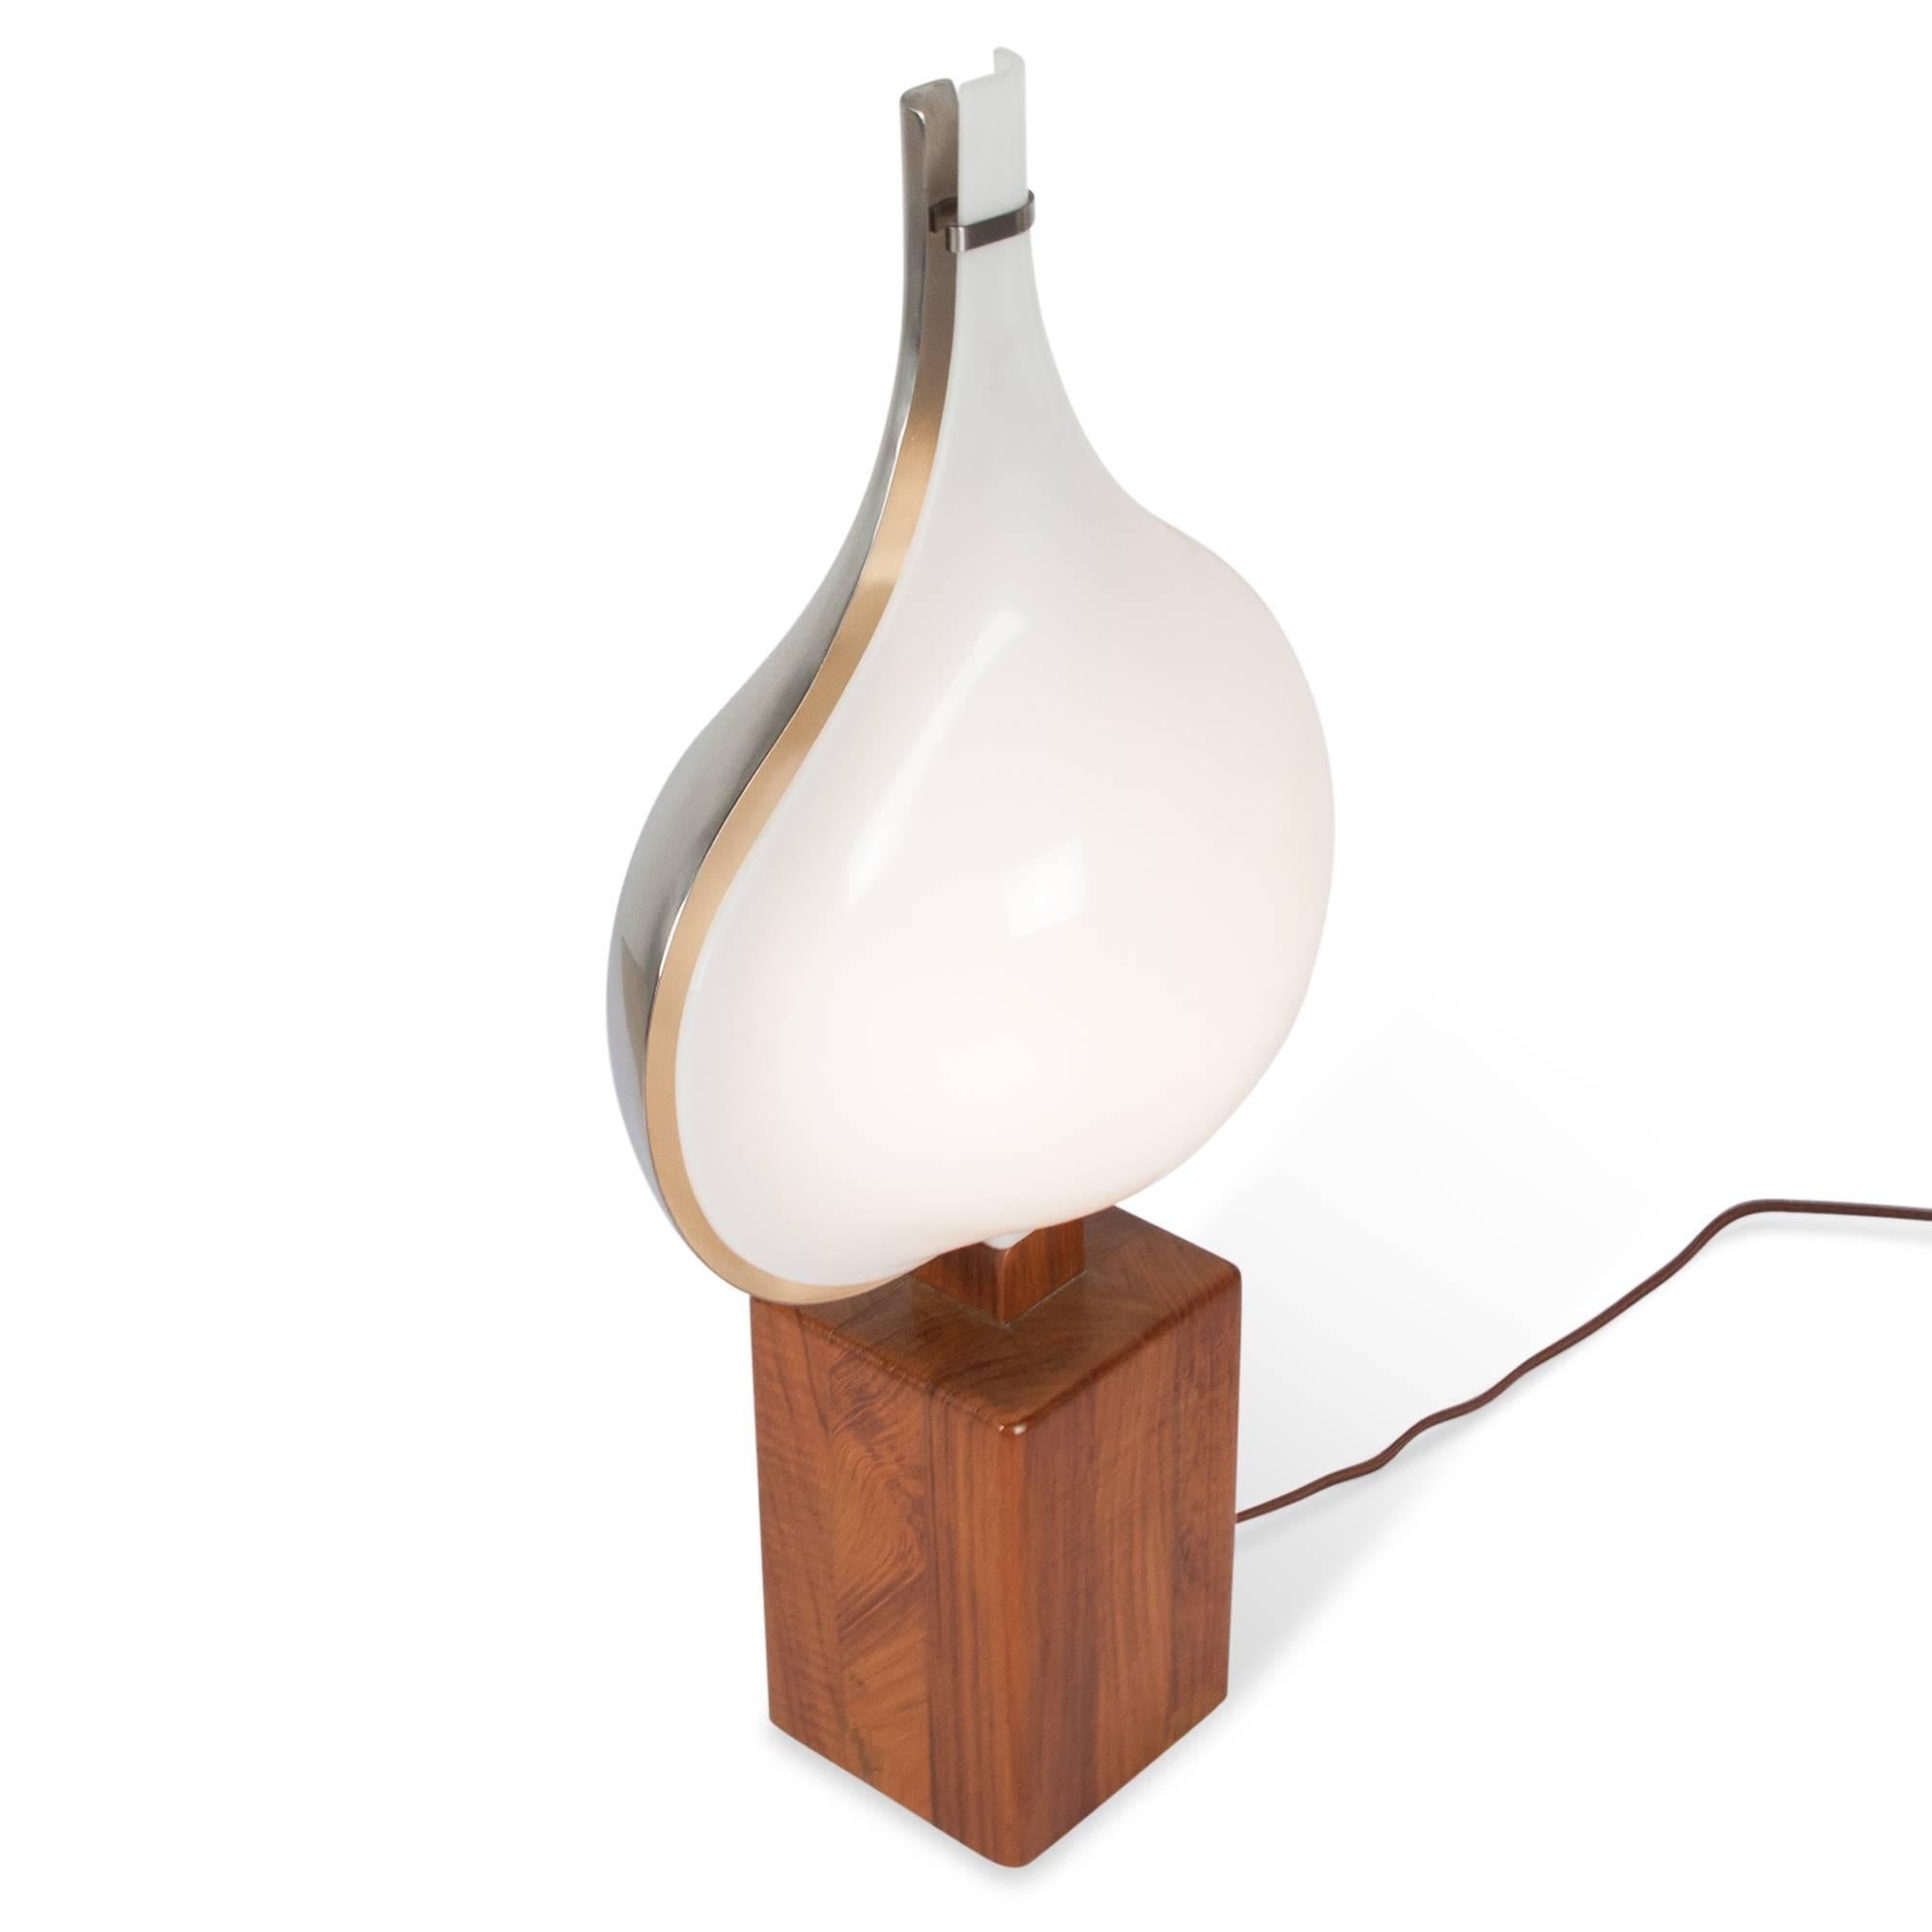 Teardrop shaped steel and white plastic illuminated element mounted on a walnut base, French, late 1960s. Measures: 4in. sq. base, 10in. W, 19in. H. 
 